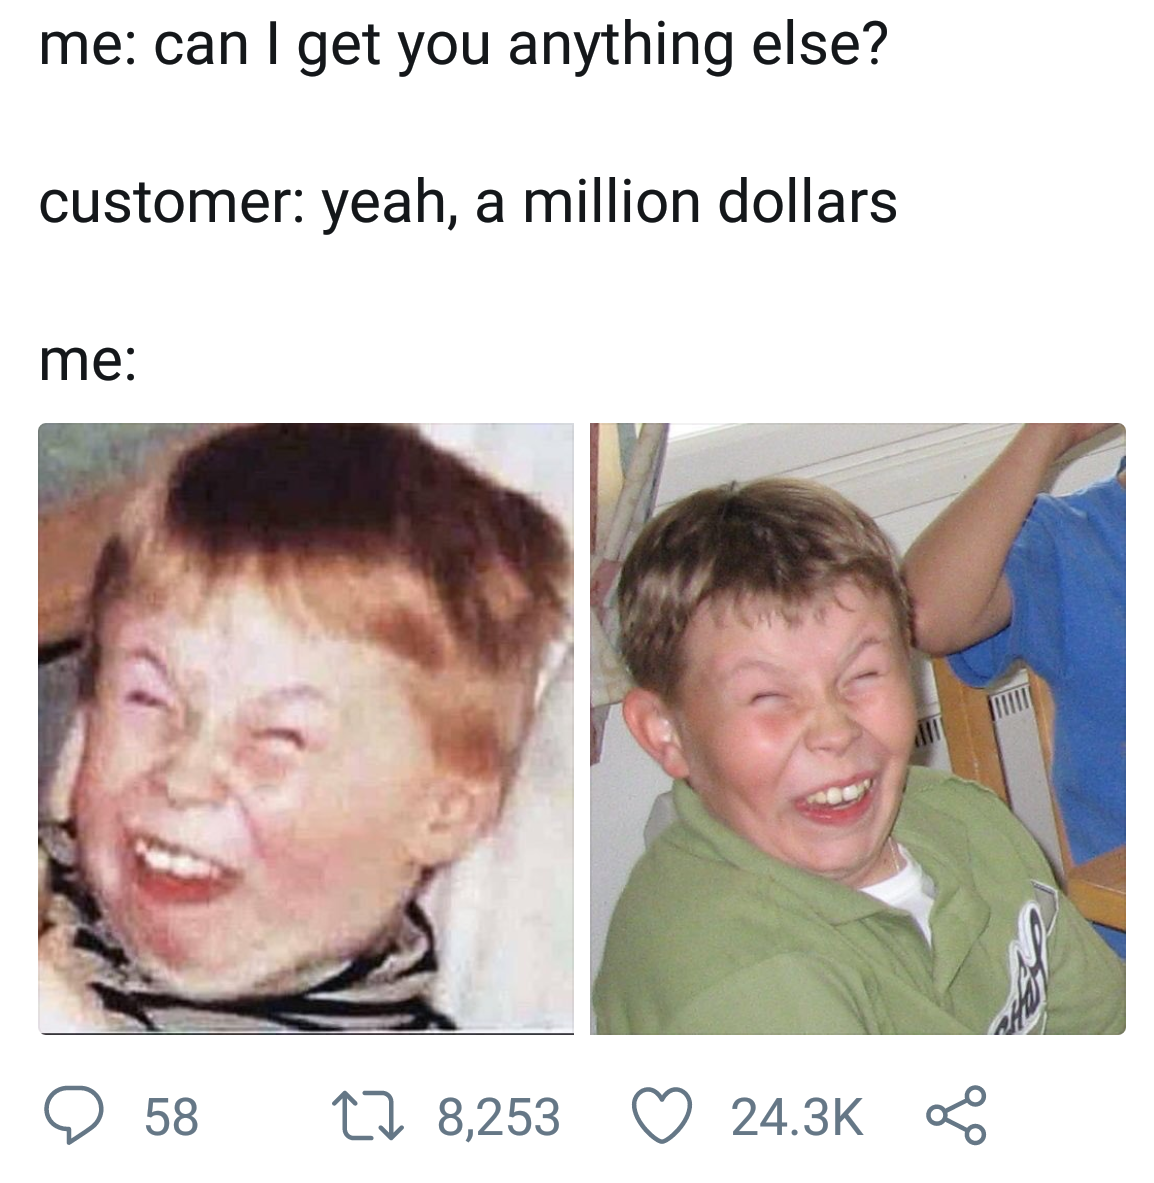 weird kid meme - me can I get you anything else? customer yeah, a million dollars me 9 58 22 8,253